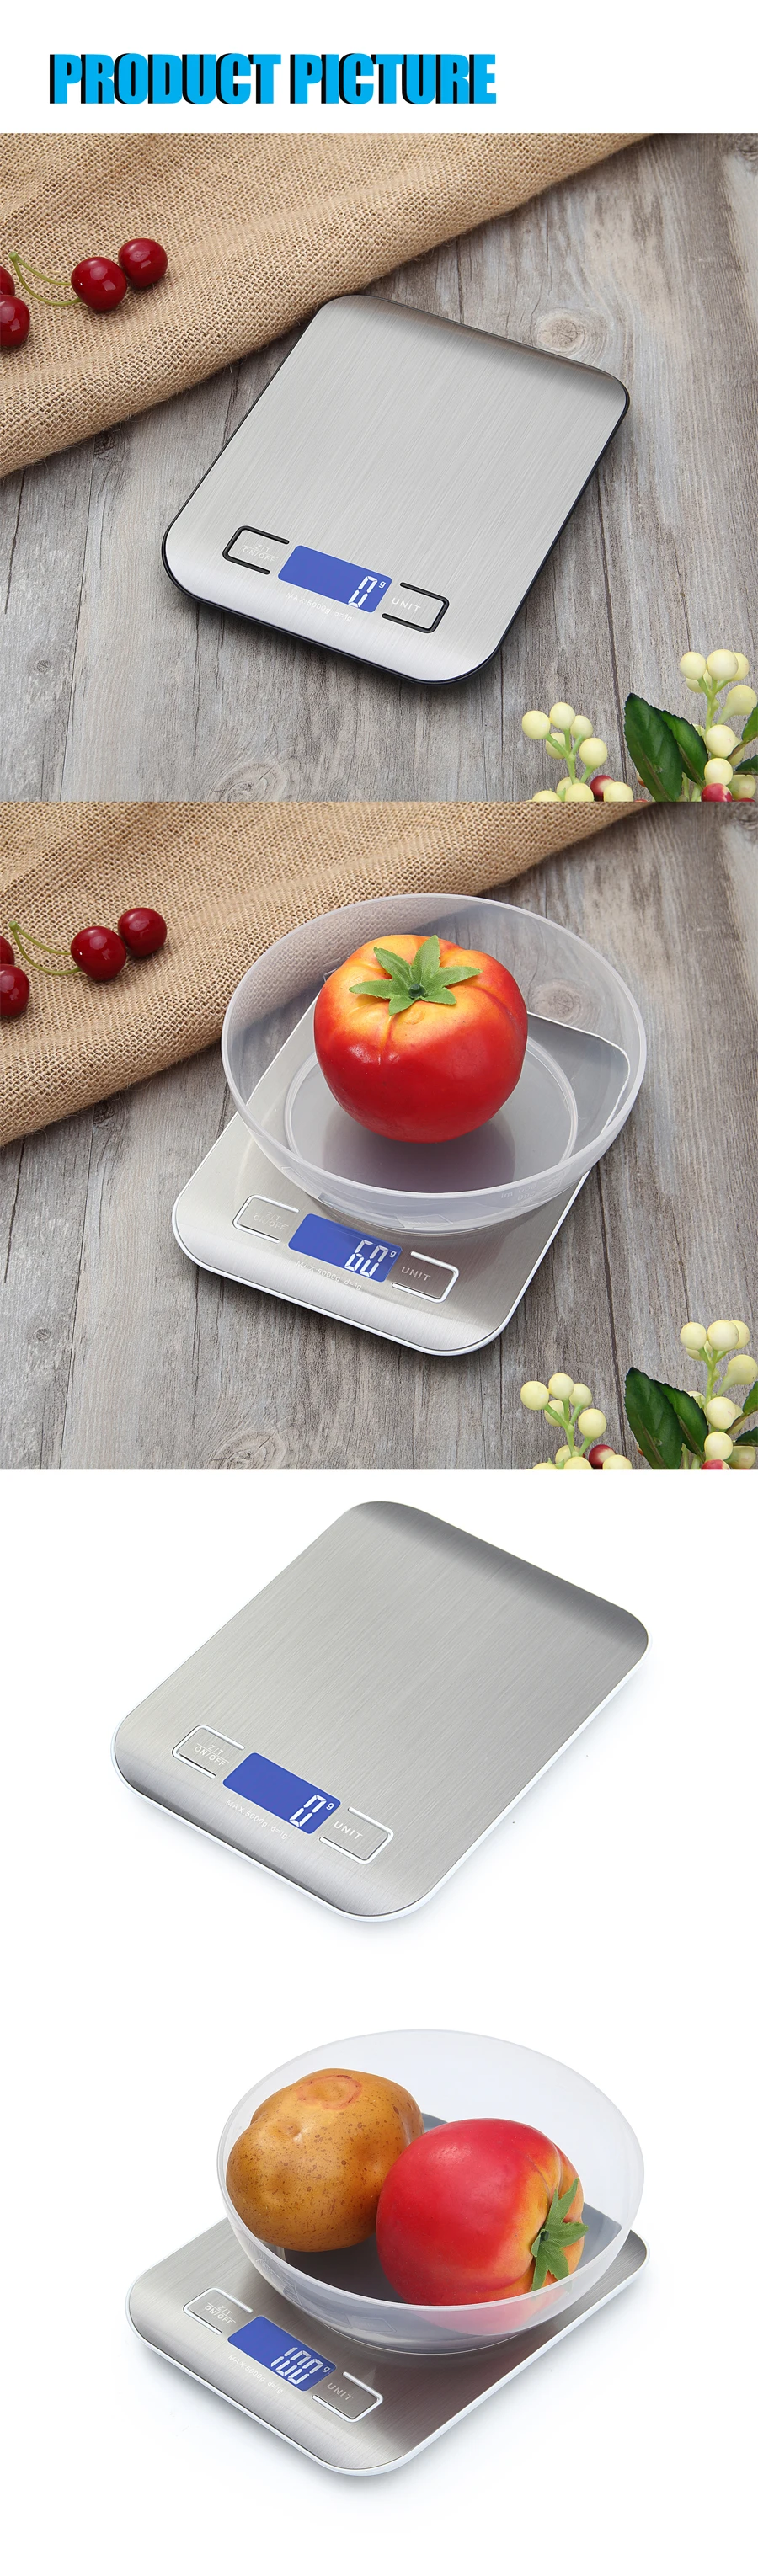 Chinese Food Scale CX-2012 5kg/1g Electronics Weighing Digital Kitchen Scale